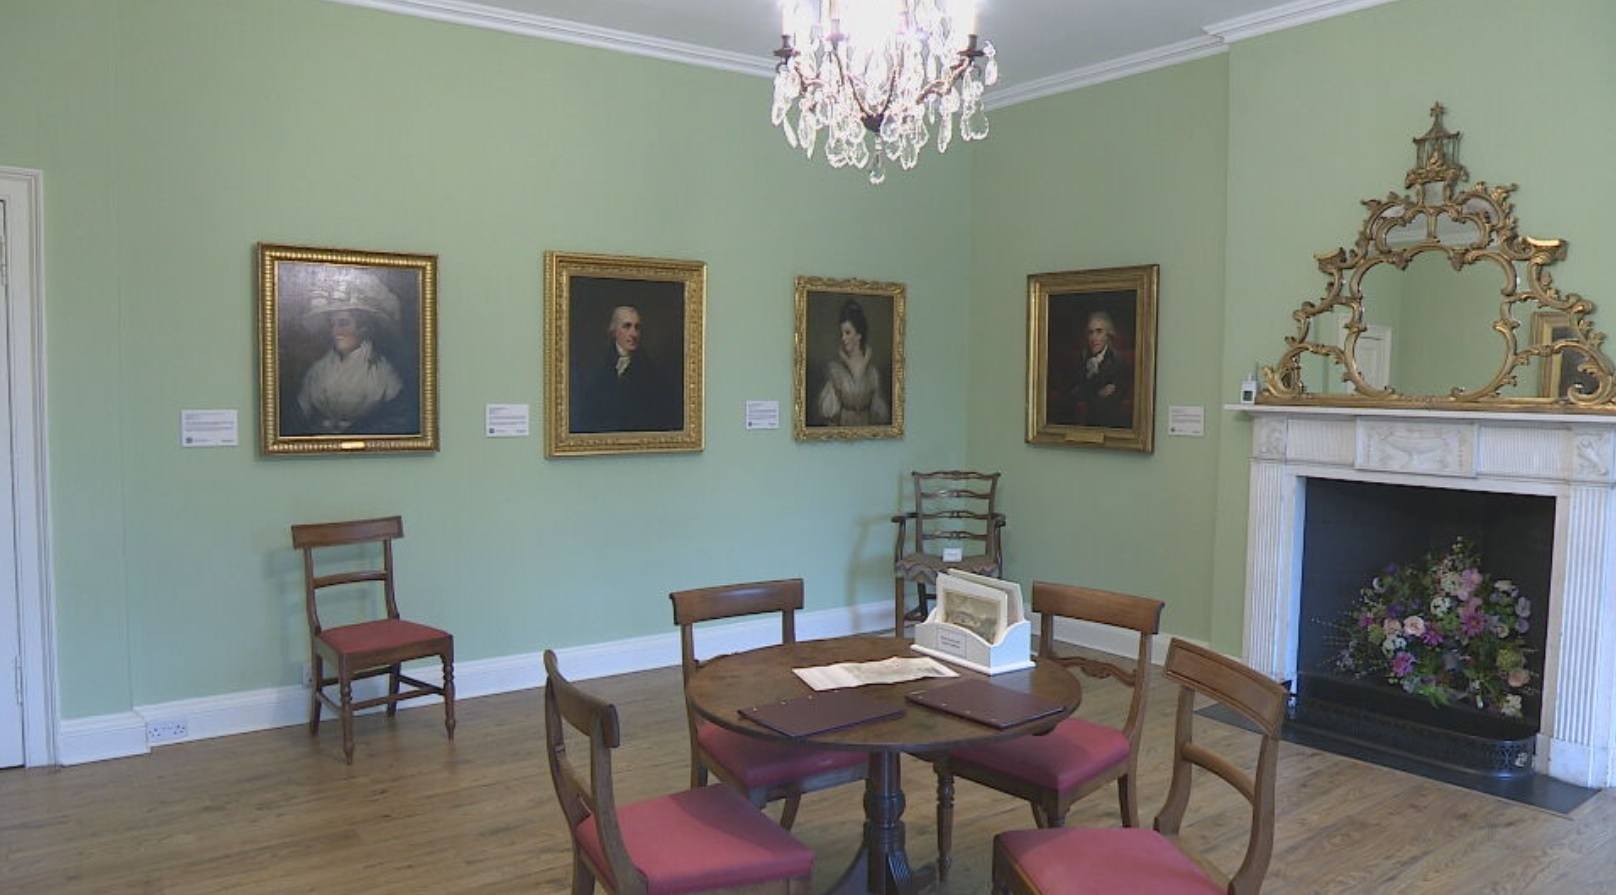 The exhibition as opened at Georgian House in Edinburgh